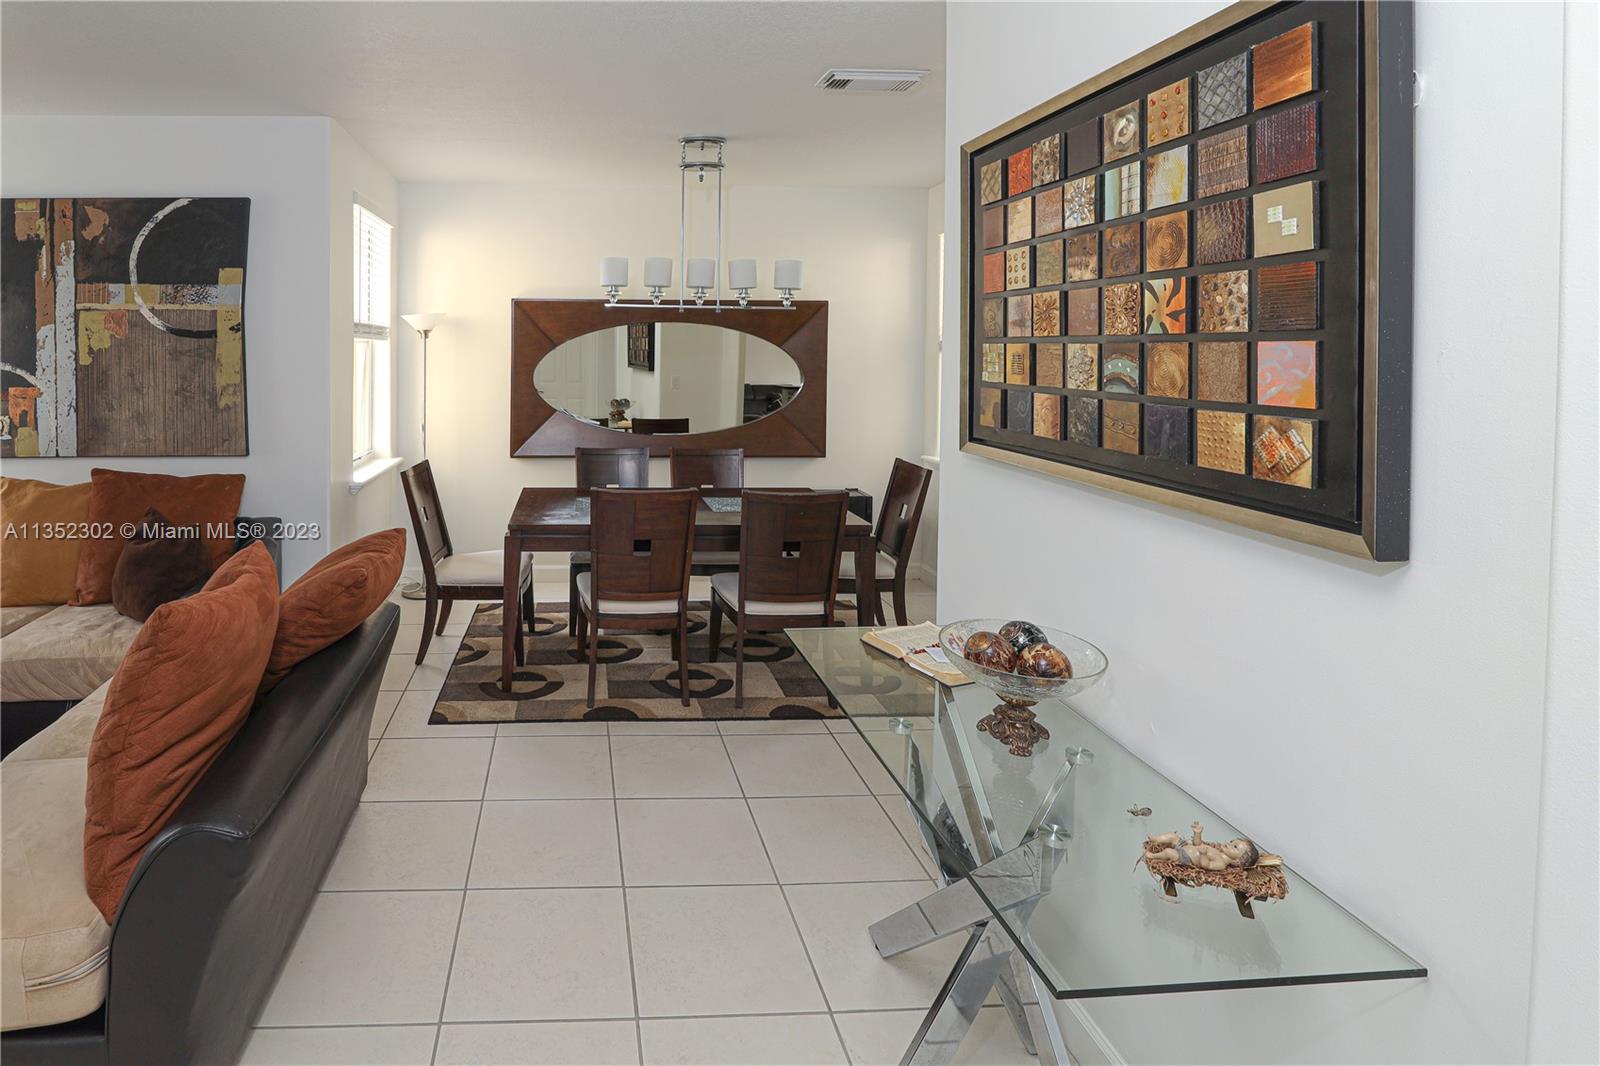 Photo 1 of 4866 108th Psge in Doral - MLS A11352302